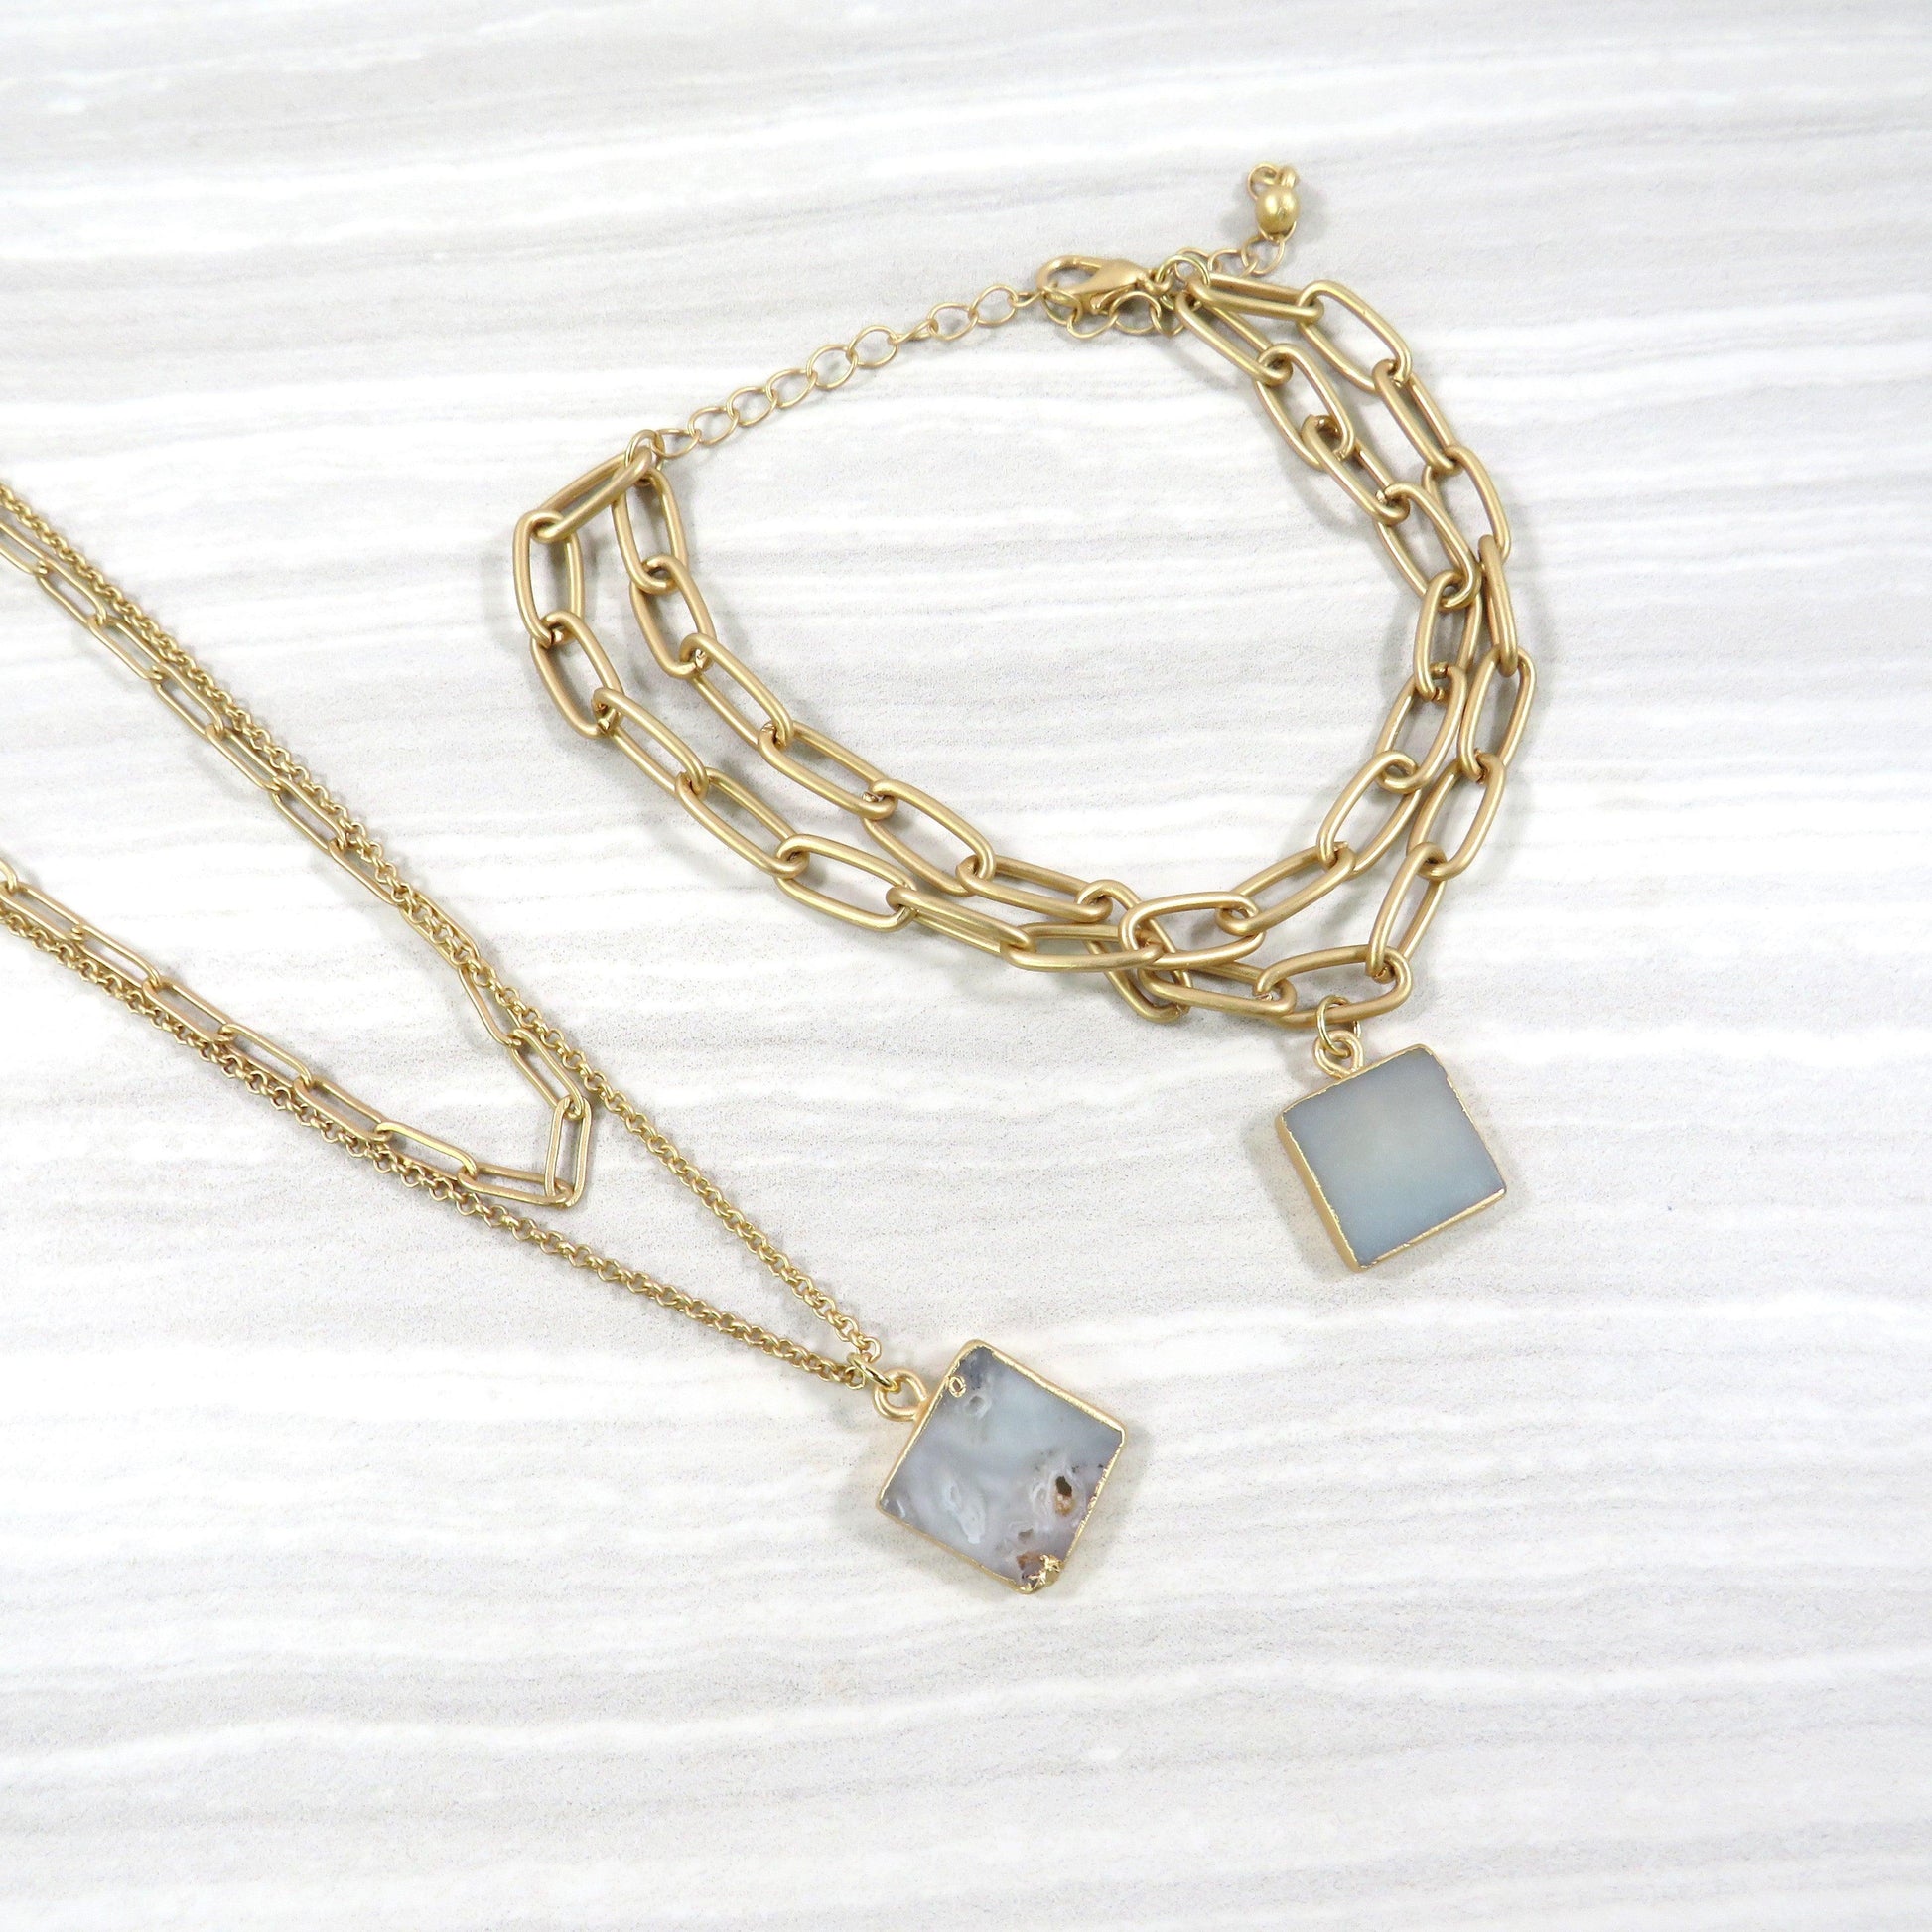 double layer gold chain necklace and bracelet set with a Amazonite stone on a gray and white tile background